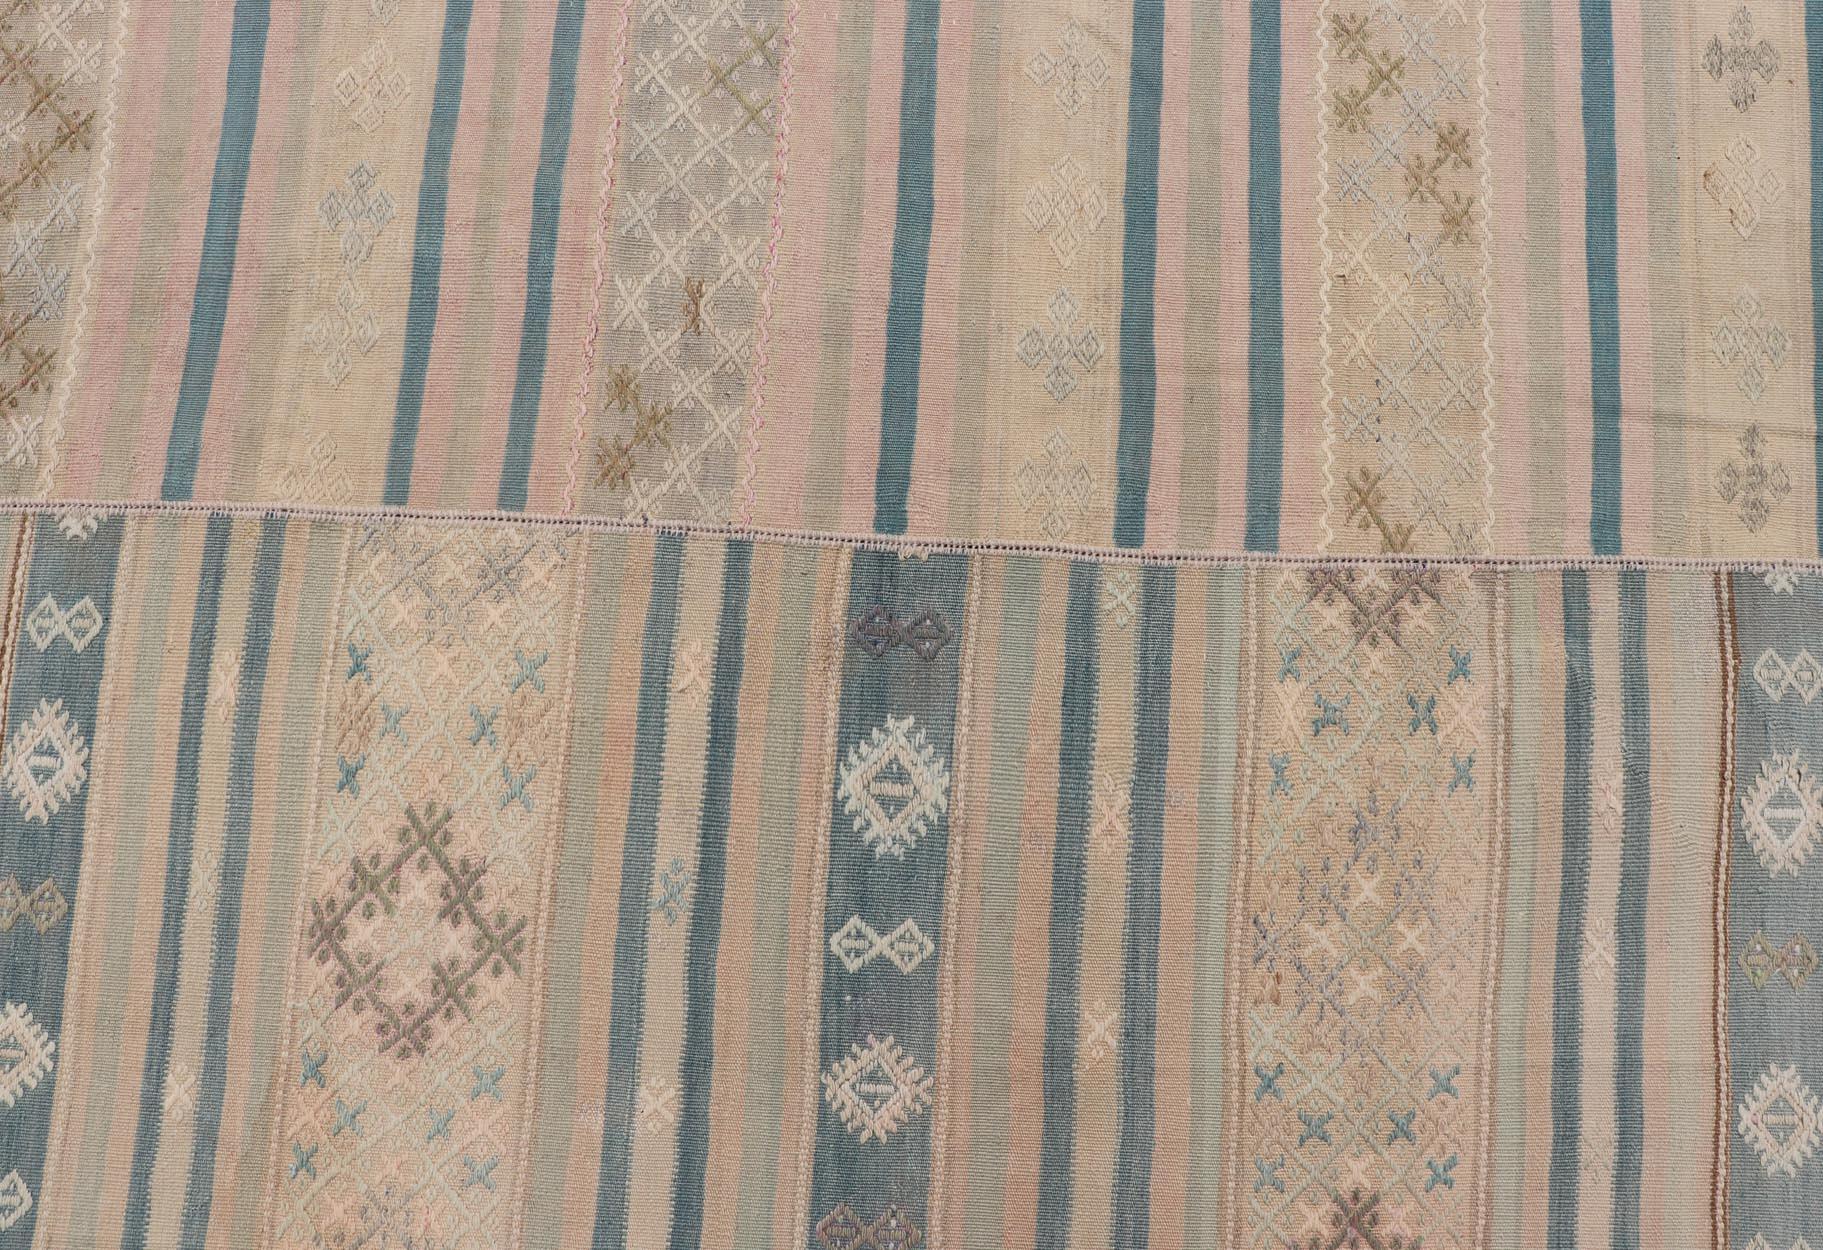 Wool Large Vintage Paneled Kilim Flat-Weave in Blue, Pink, Taupe, Gray, Light Brown For Sale